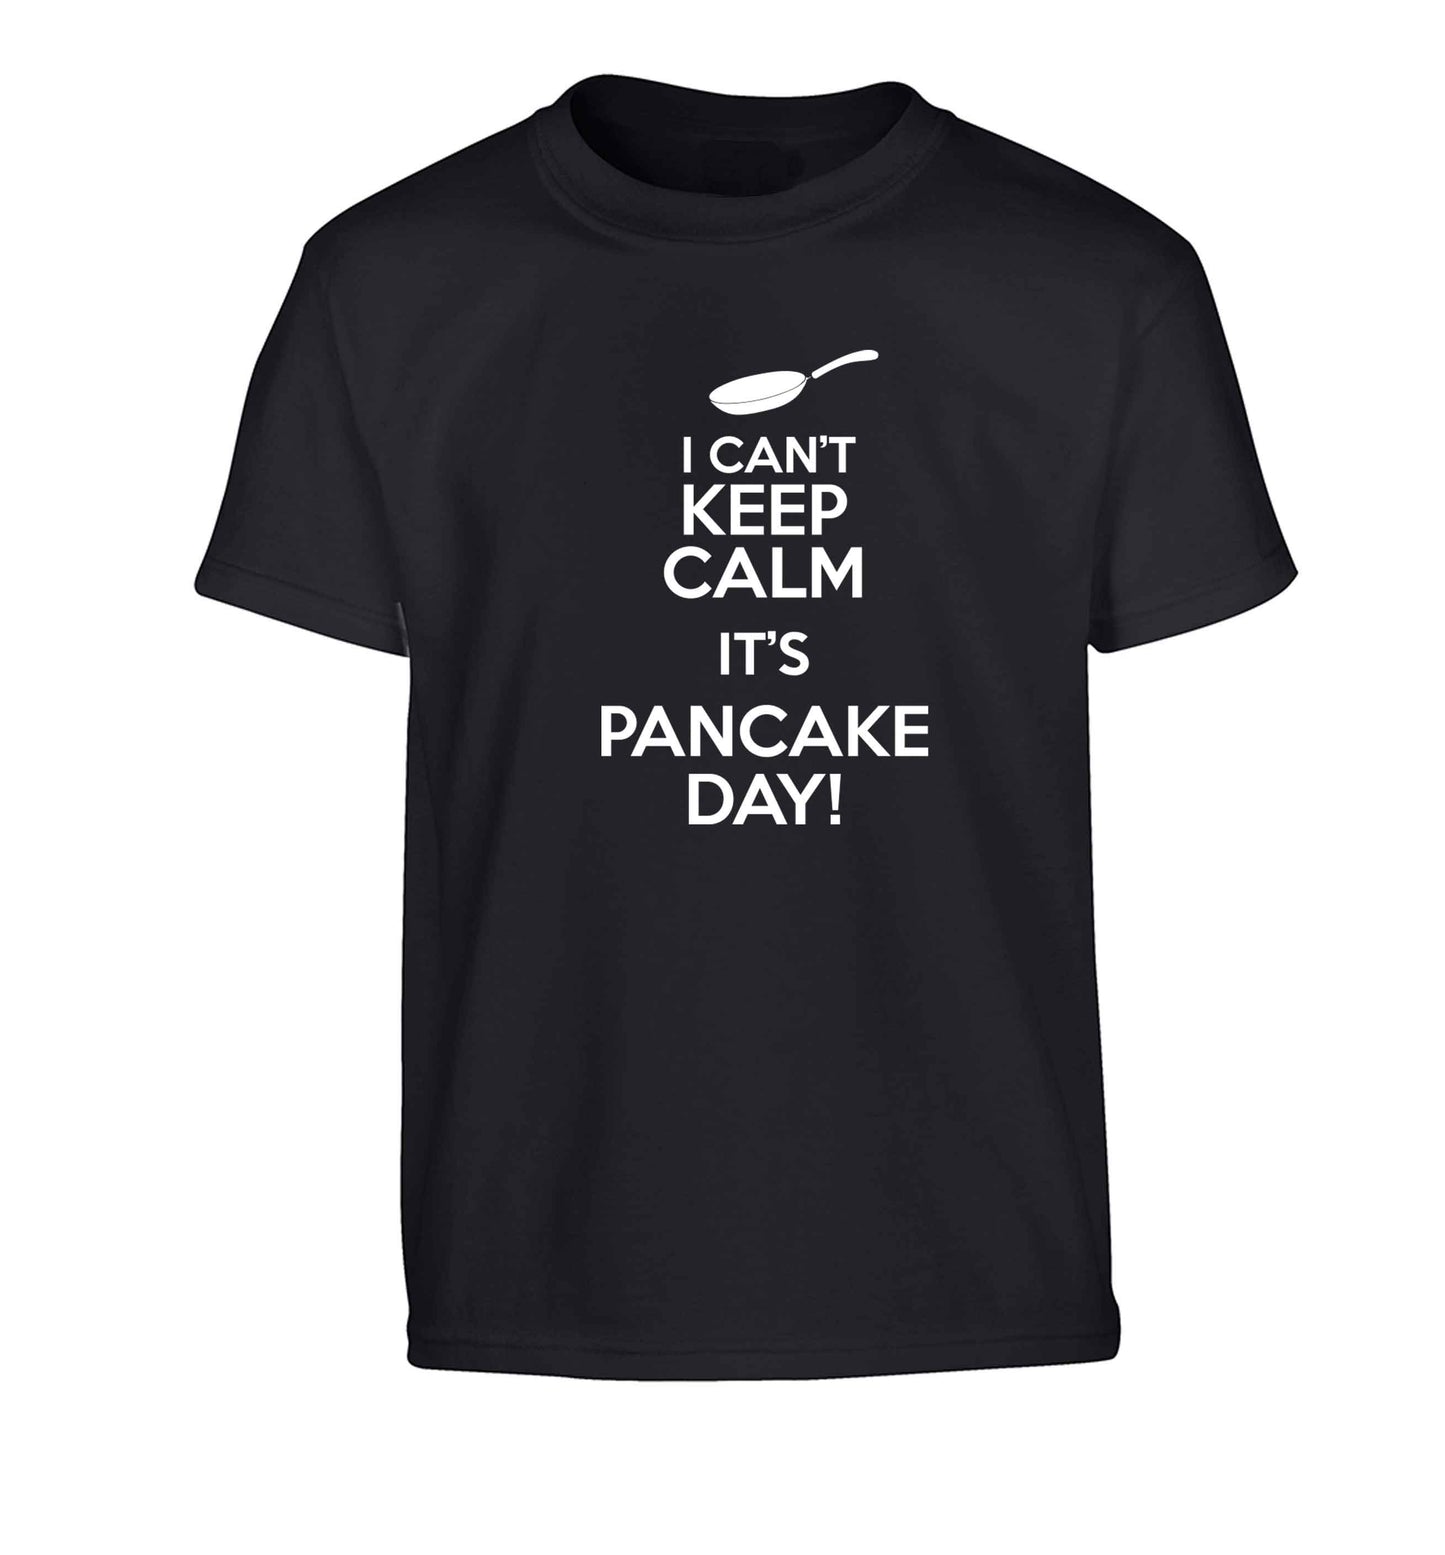 I can't keep calm it's pancake day! Children's black Tshirt 12-13 Years